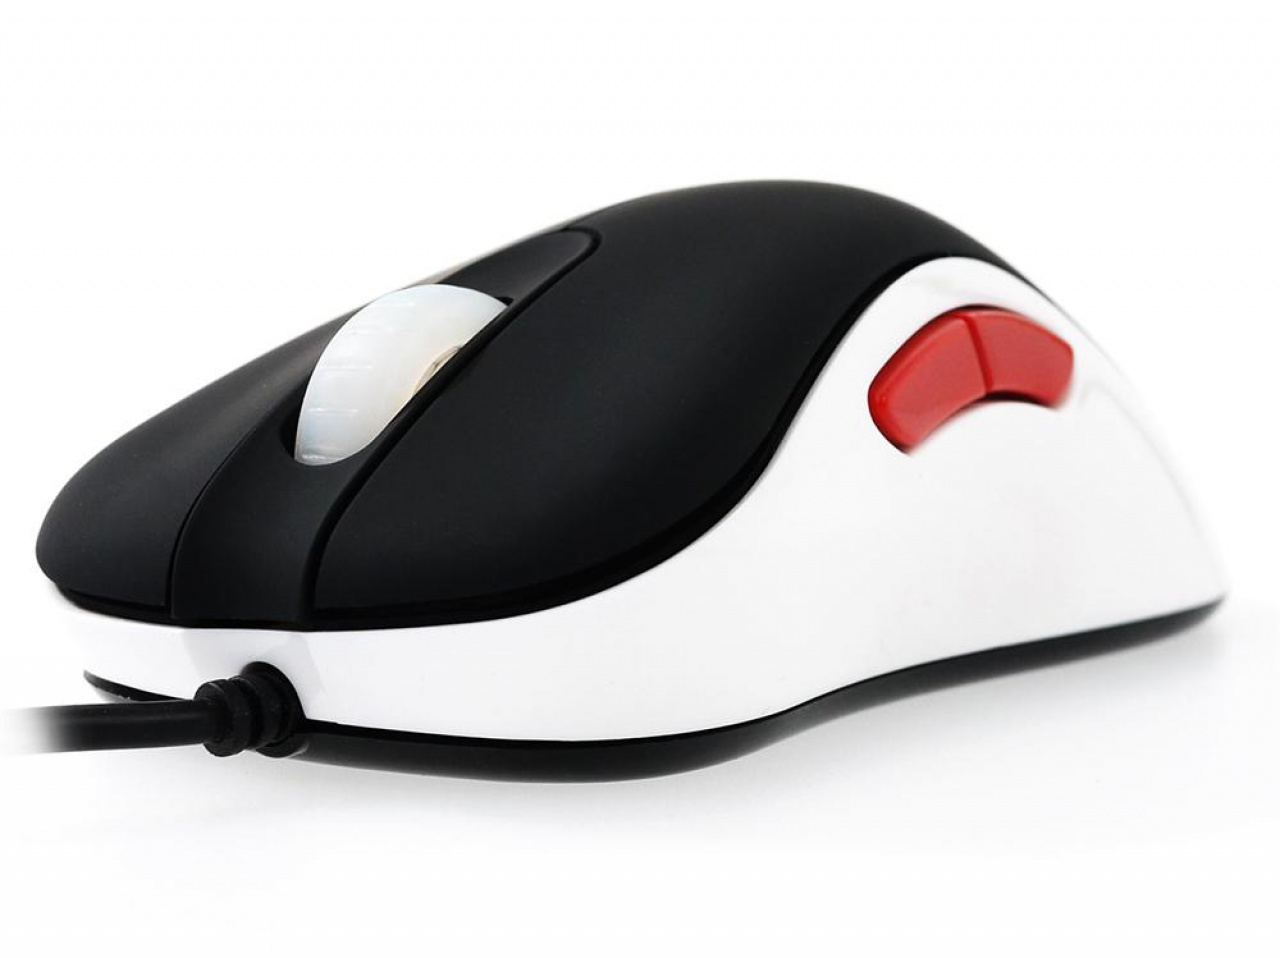 Zowie Ec2 Evo Gaming Mouse Reviews Hardware Tests Dlh Net The Gaming People